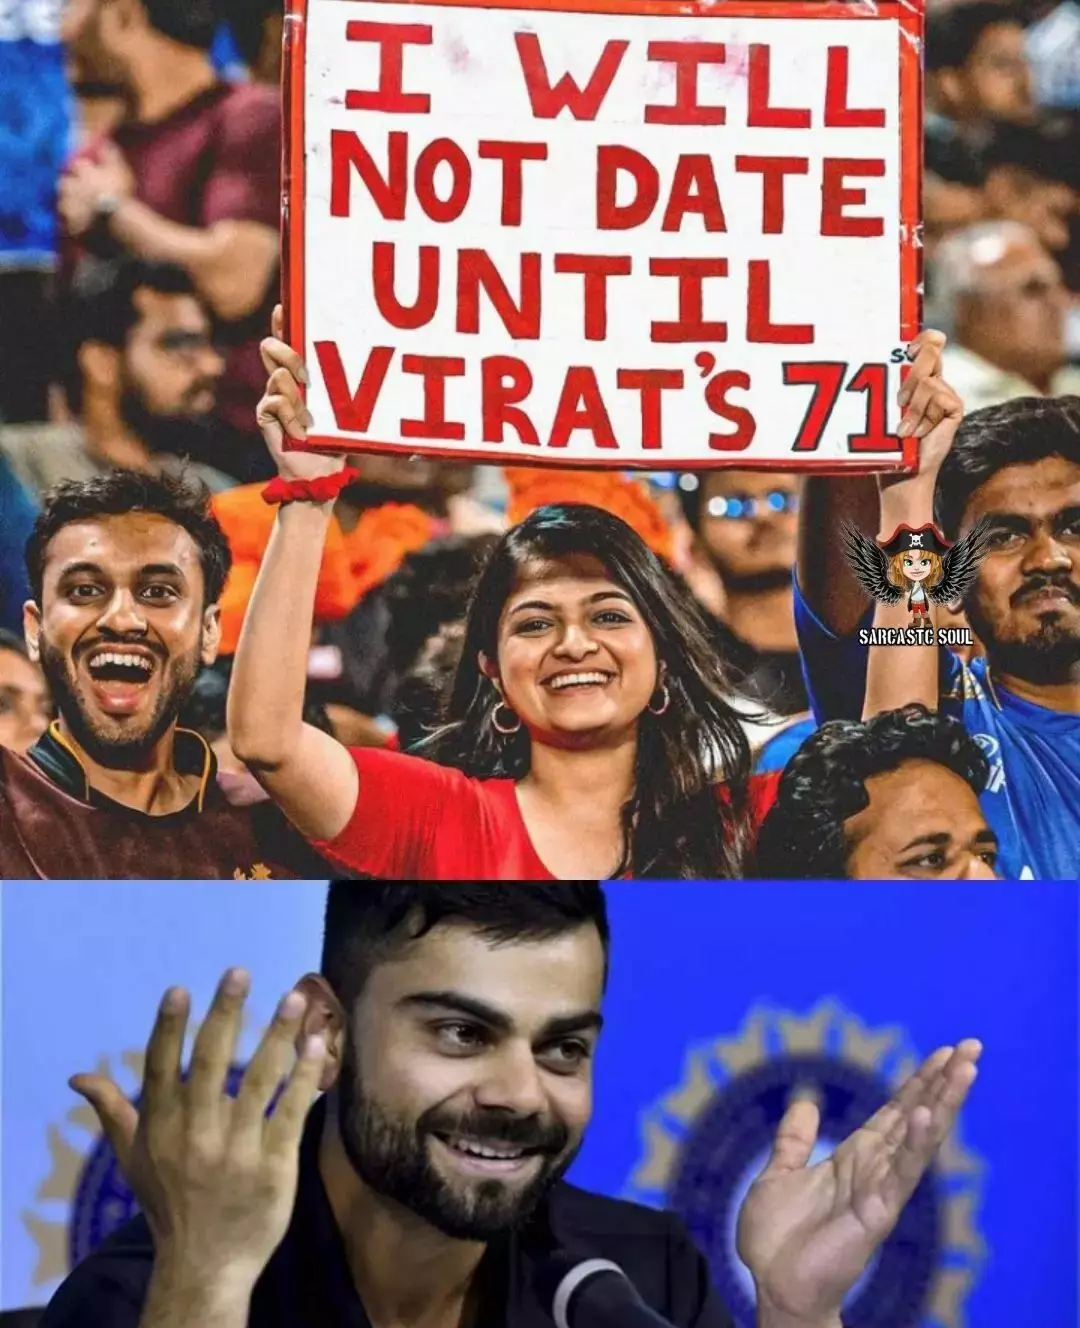 I will not date until Virats 71st: Fangirls poster for Kohli goes VIRAL